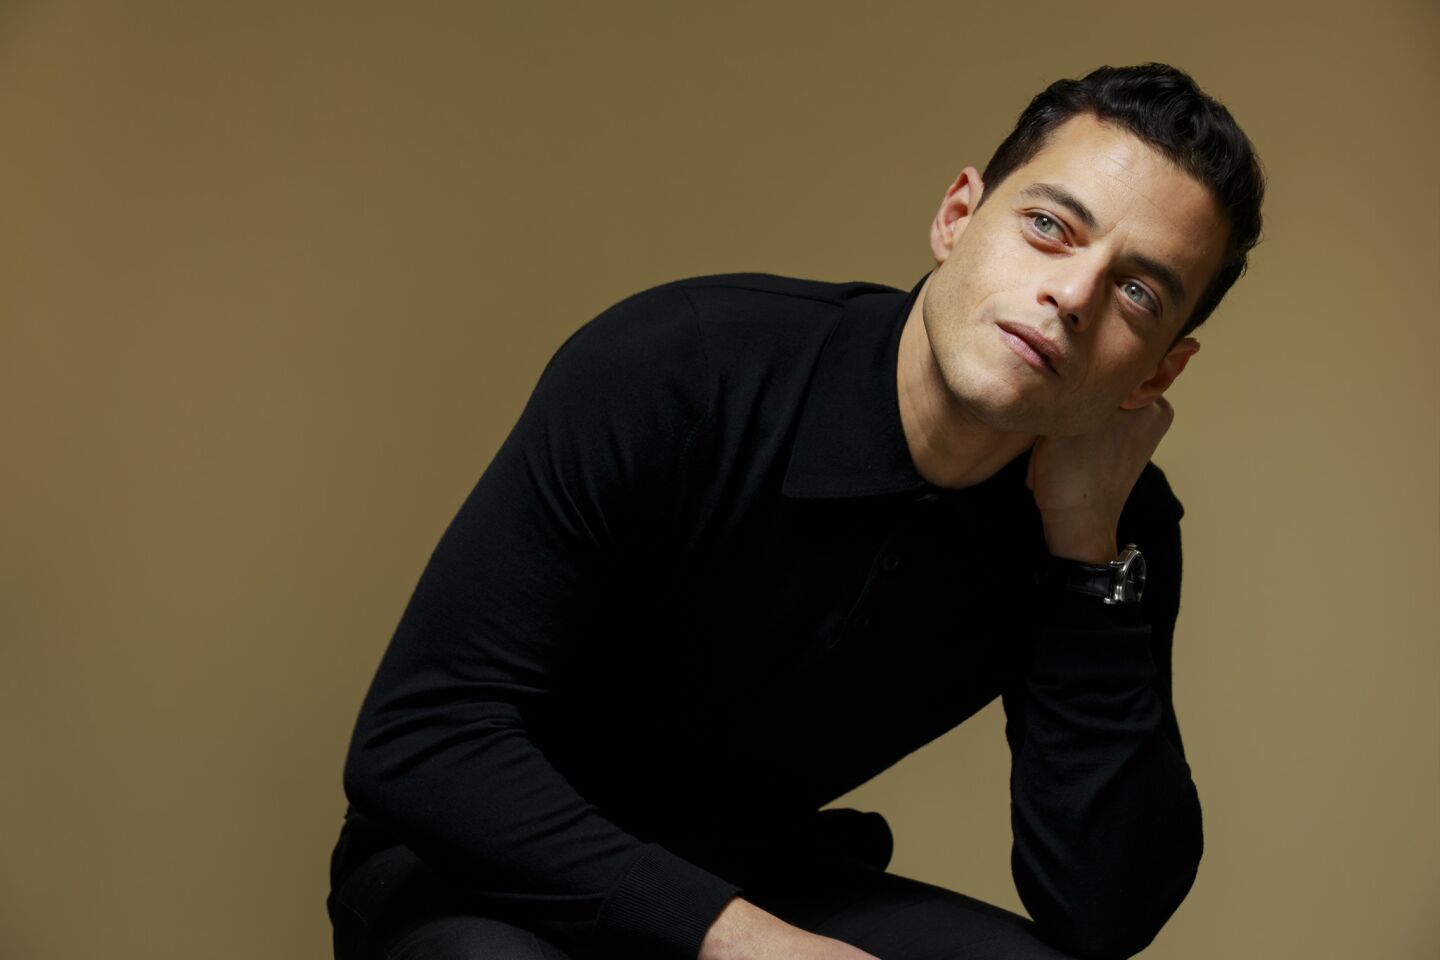 It’s the first nomination for Rami Malek, who already claimed a Golden Globe for portraying iconic singer Freddie Mercury. He’s nominated by BAFTA and SAG as well, and already has an Emmy for the ongoing drama series “Mr. Robot.”